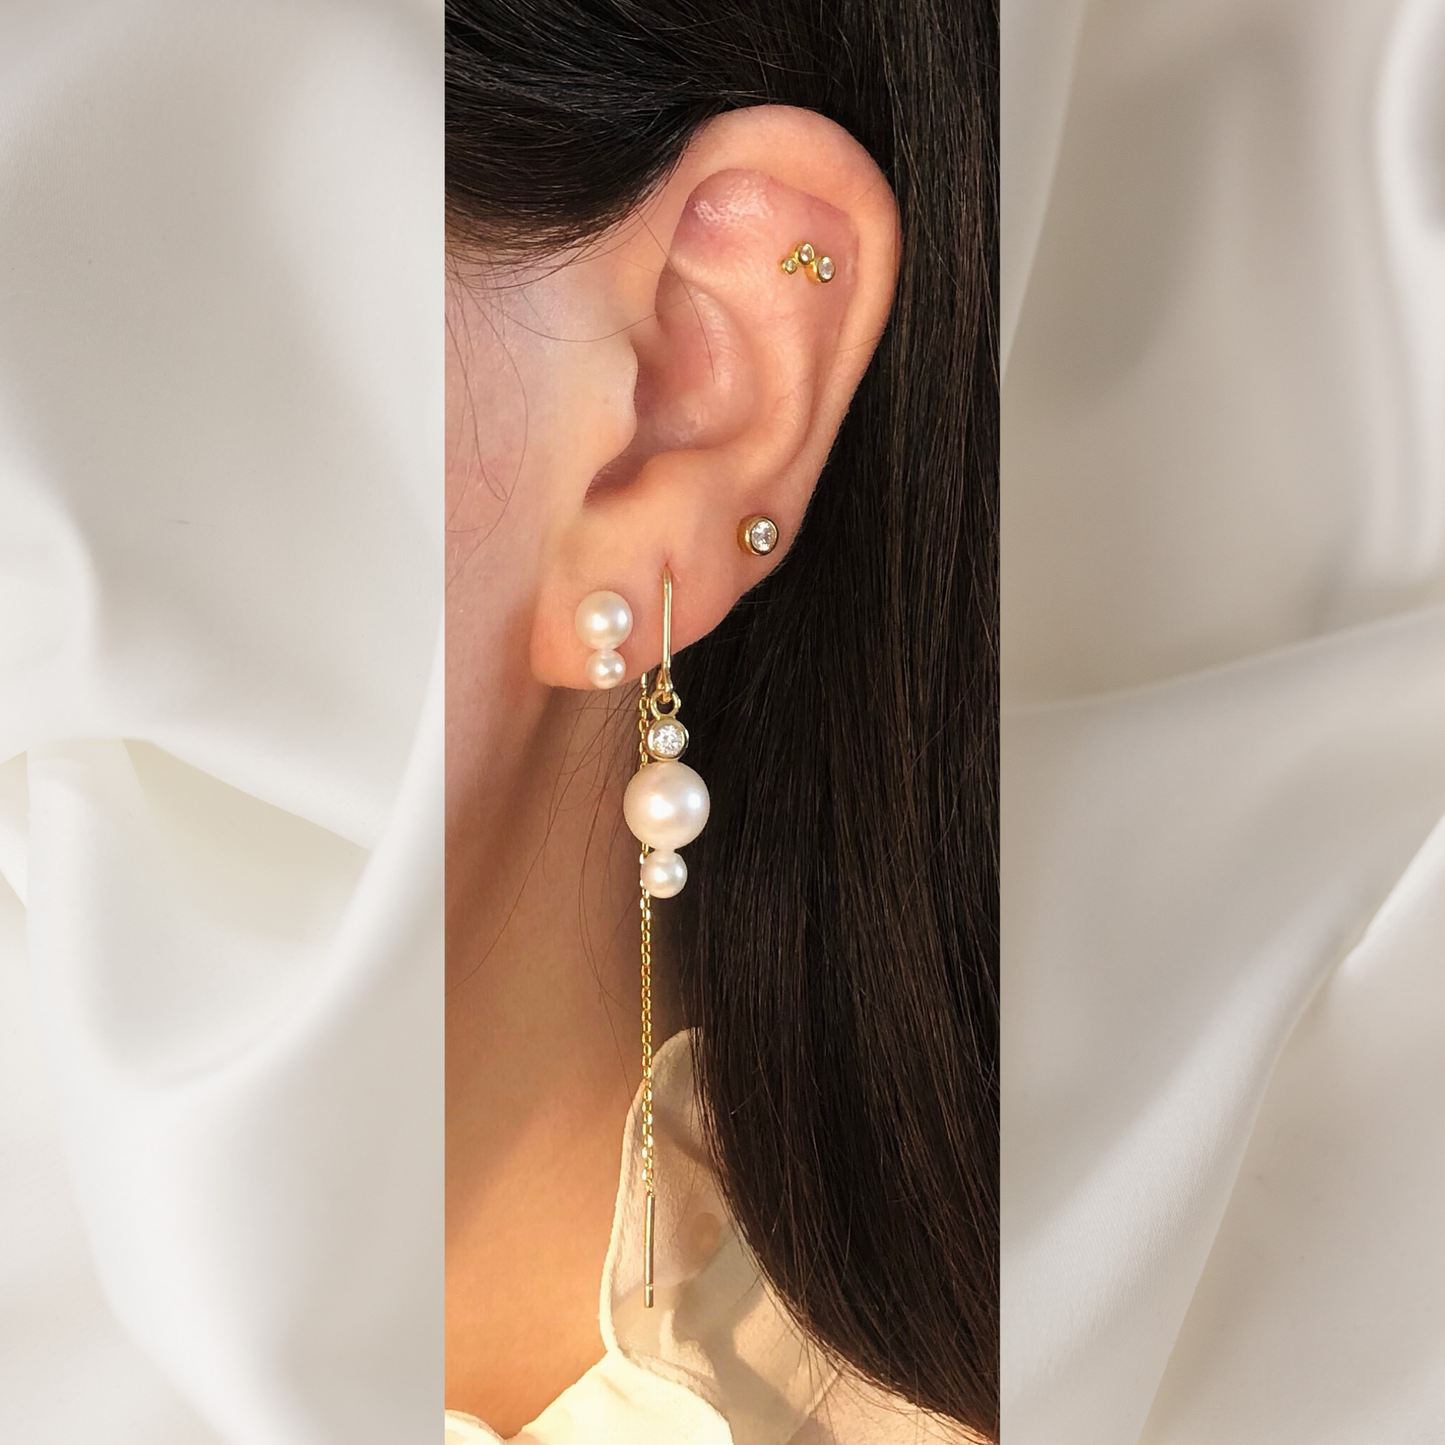 Horizon Hook Threader Earring -  Gold Plated Silver White, Clear Freshwater Pearls, Cubic zirconias